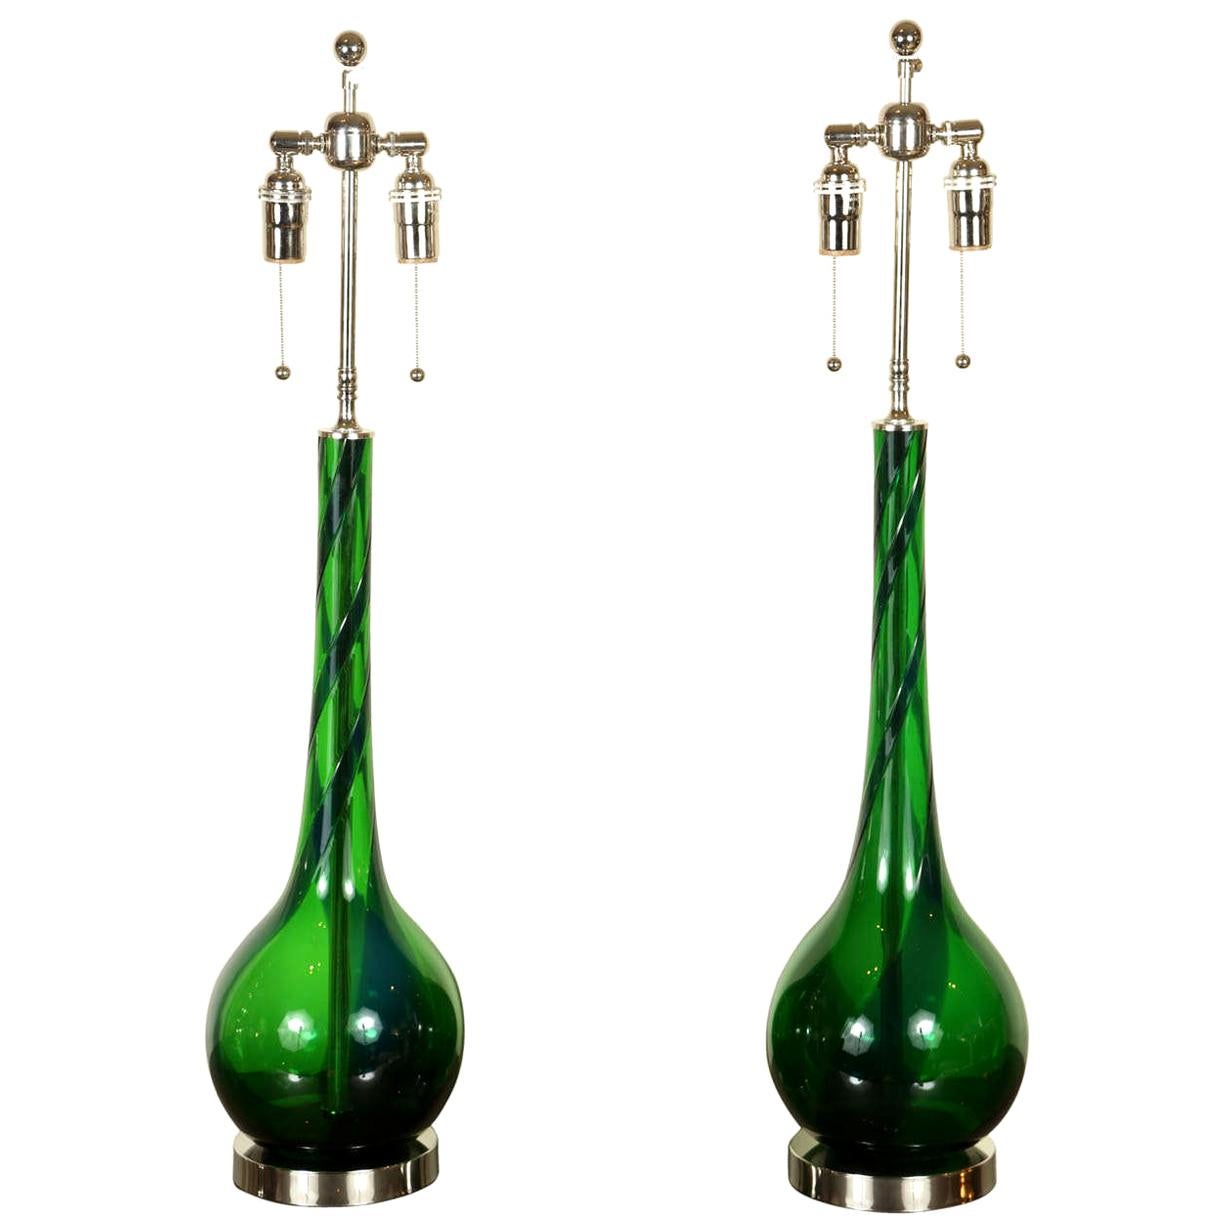 Pair of Emerald Blown Glass Table Lamps